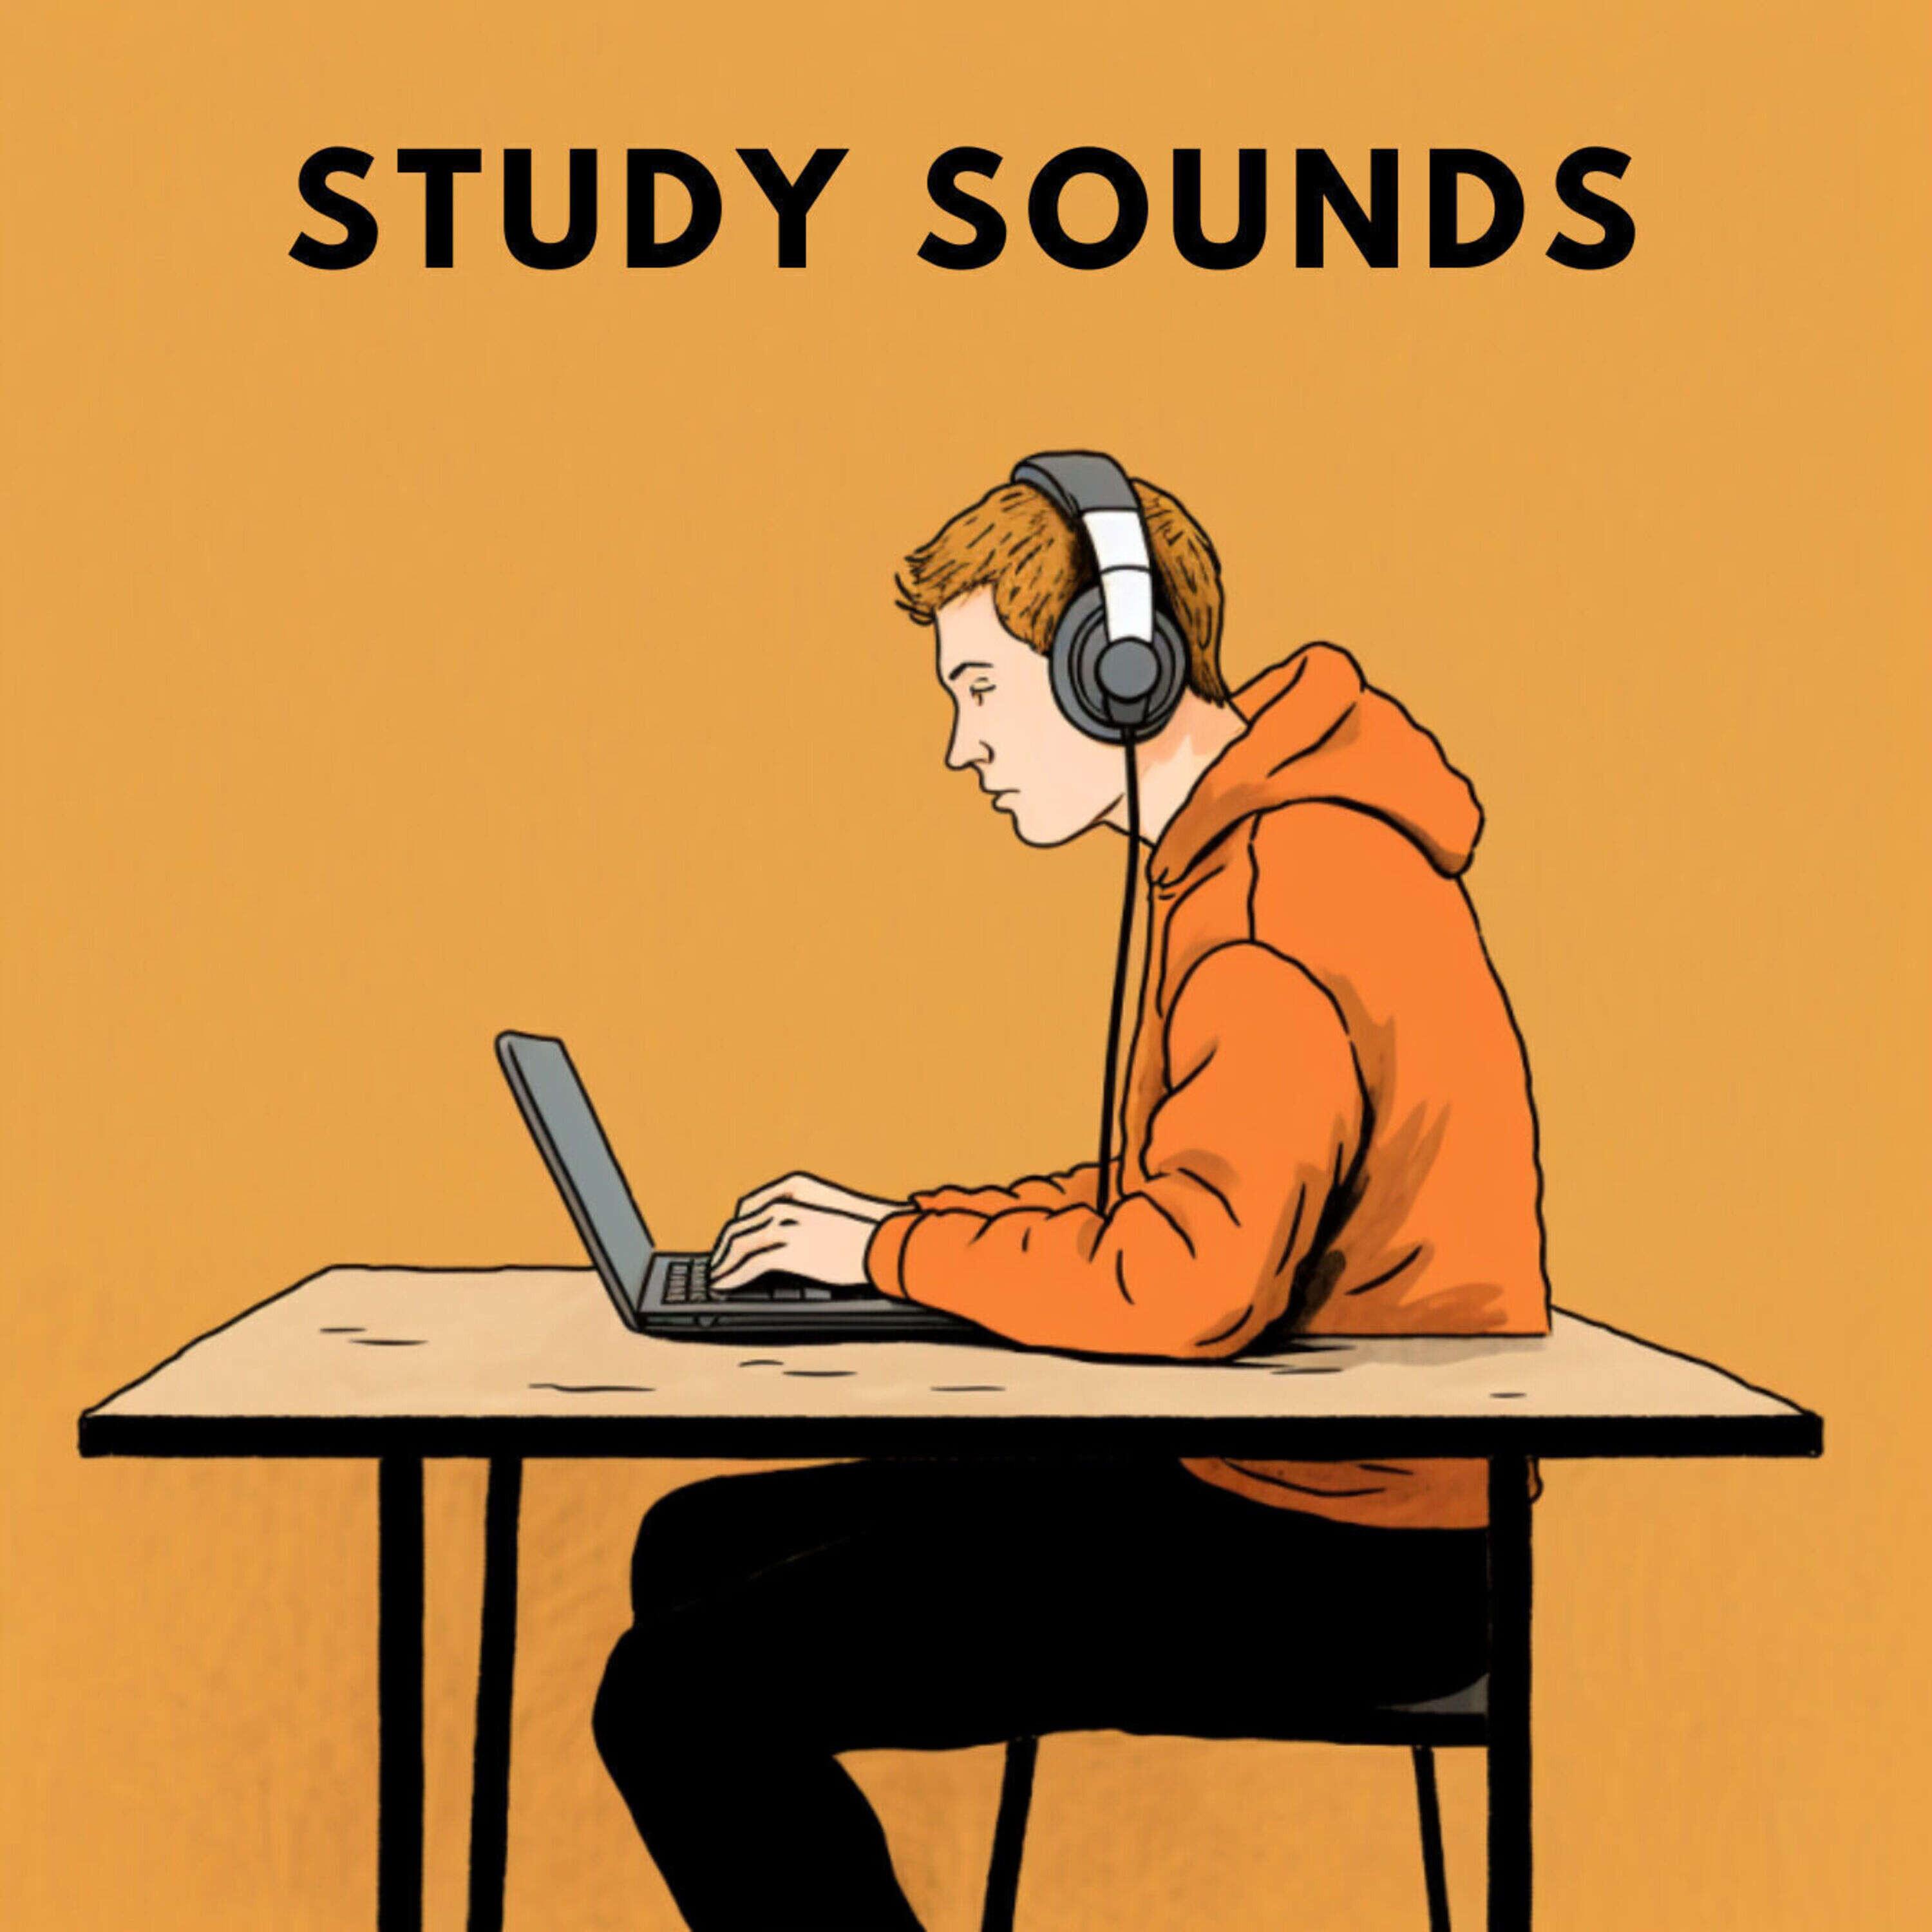 Study sounds ~ sounds to put you in a better mood☕ Chill lofi beats for studying, relaxing